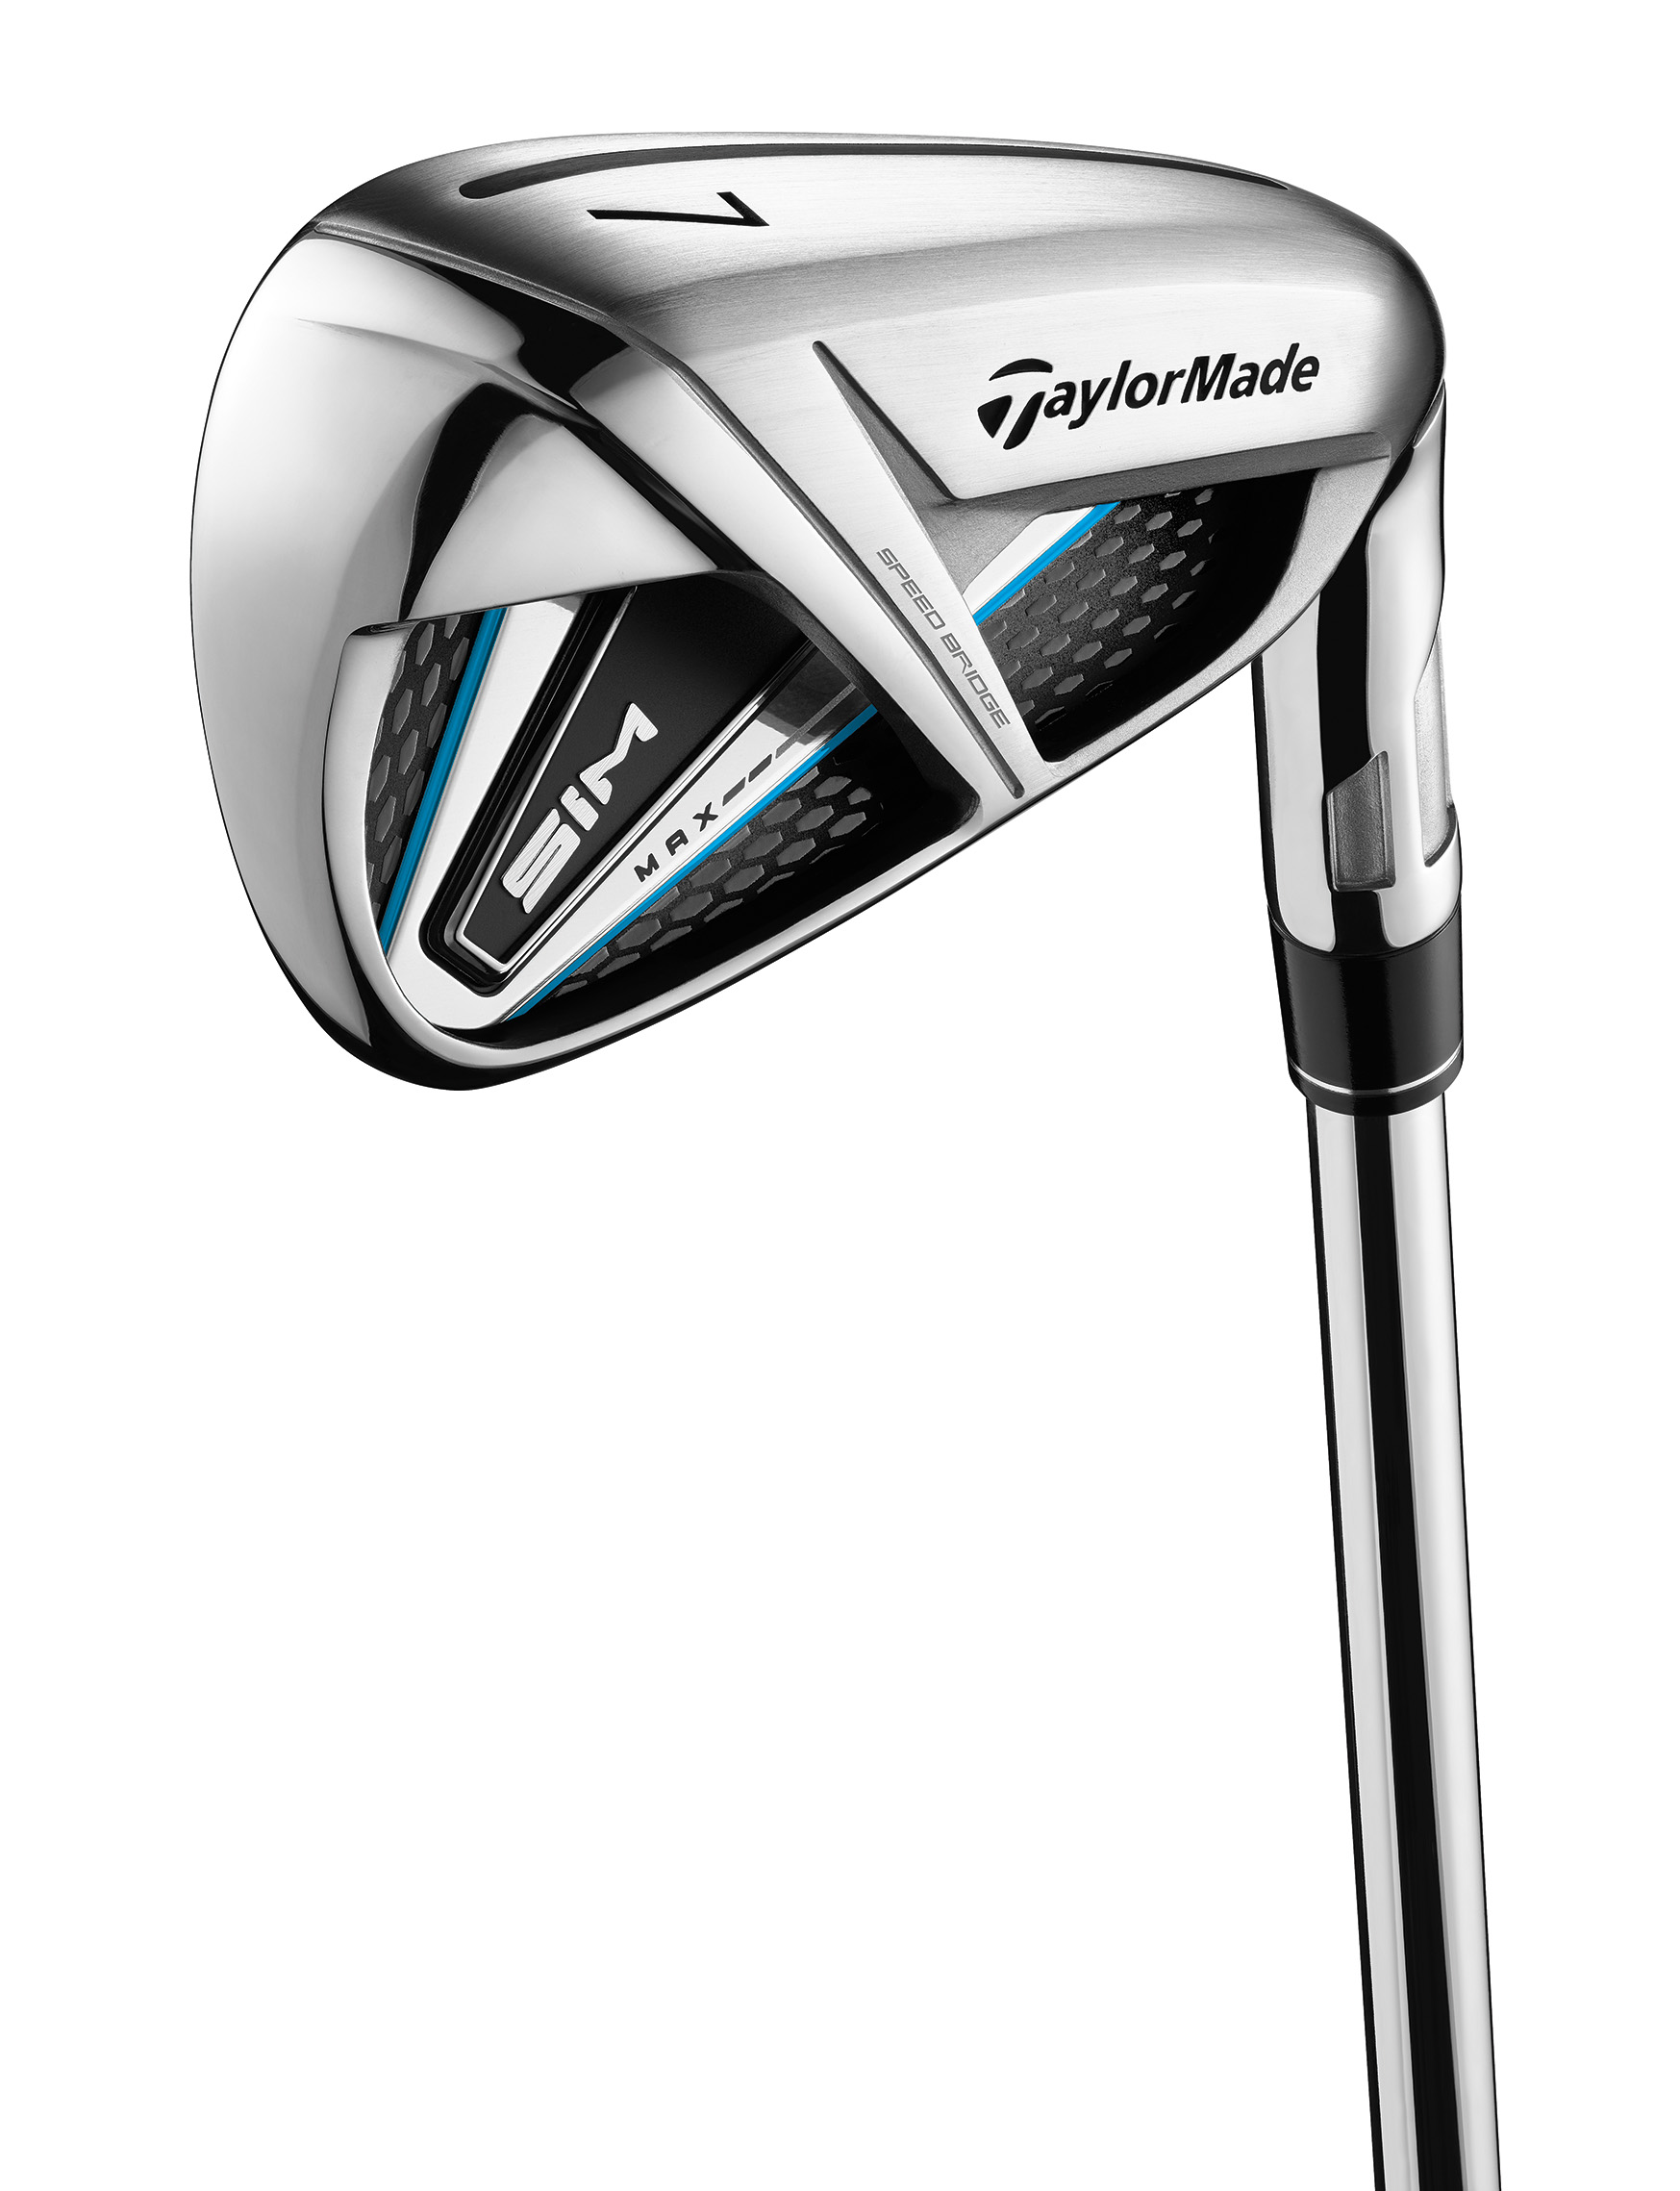 New Taylormade Sim Max And Max Os Irons Find New Ways To Add Face